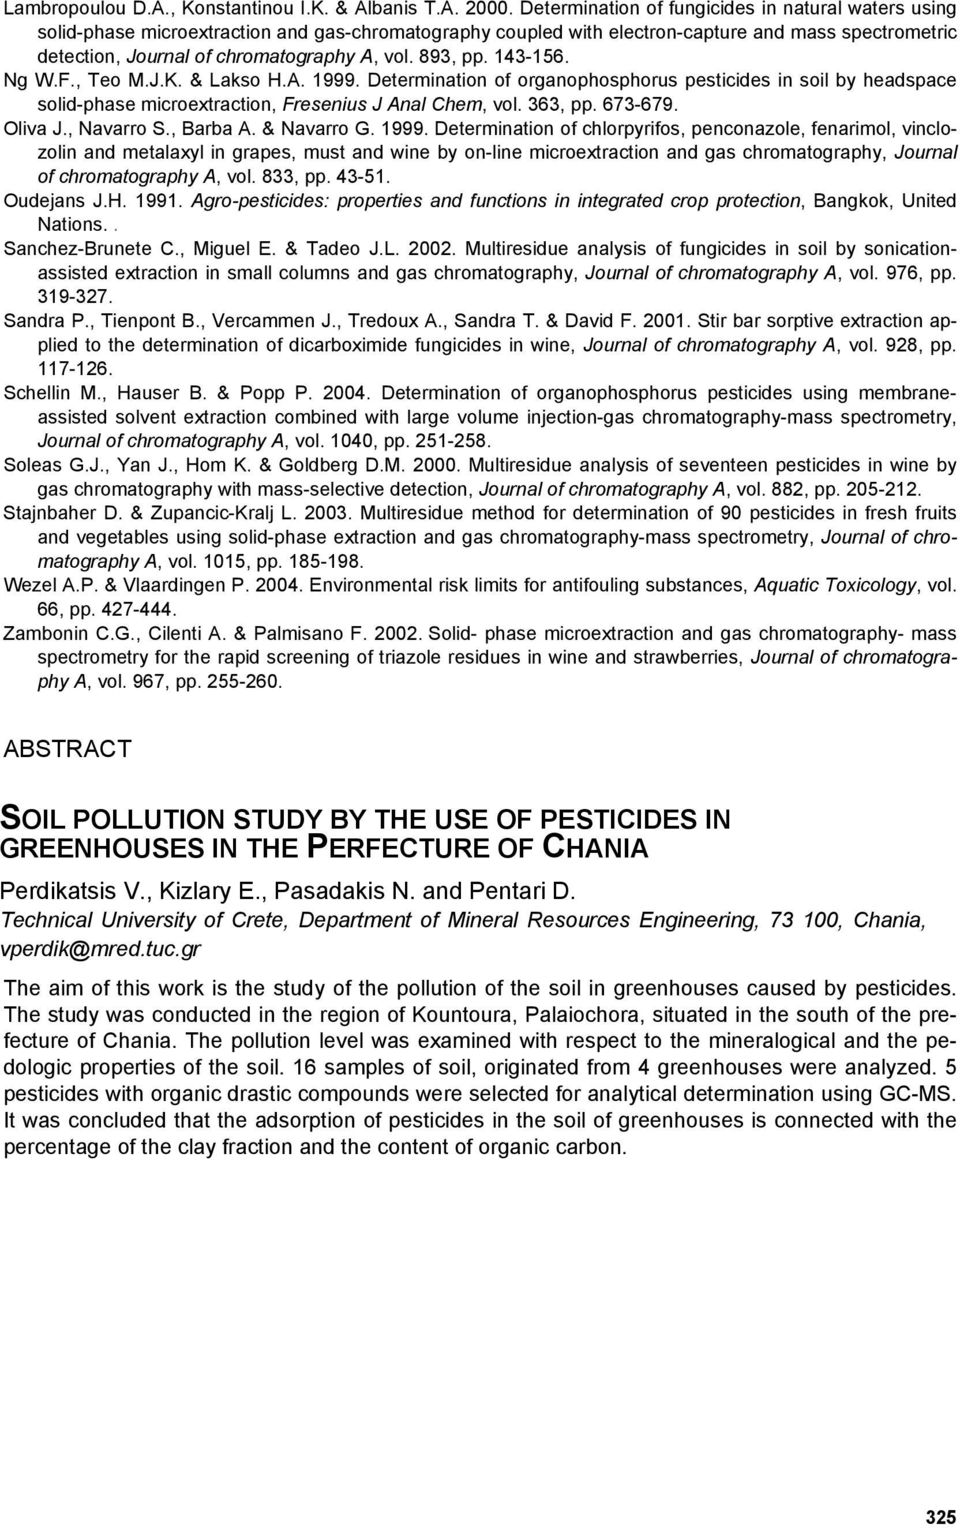 893, pp. 143-156. Ng W.F., Teo M.J.K. & Lakso H.A. 1999. Determination of organophosphorus pesticides in soil by headspace solid-phase microextraction, Fresenius J Anal Chem, vol. 363, pp. 673-679.